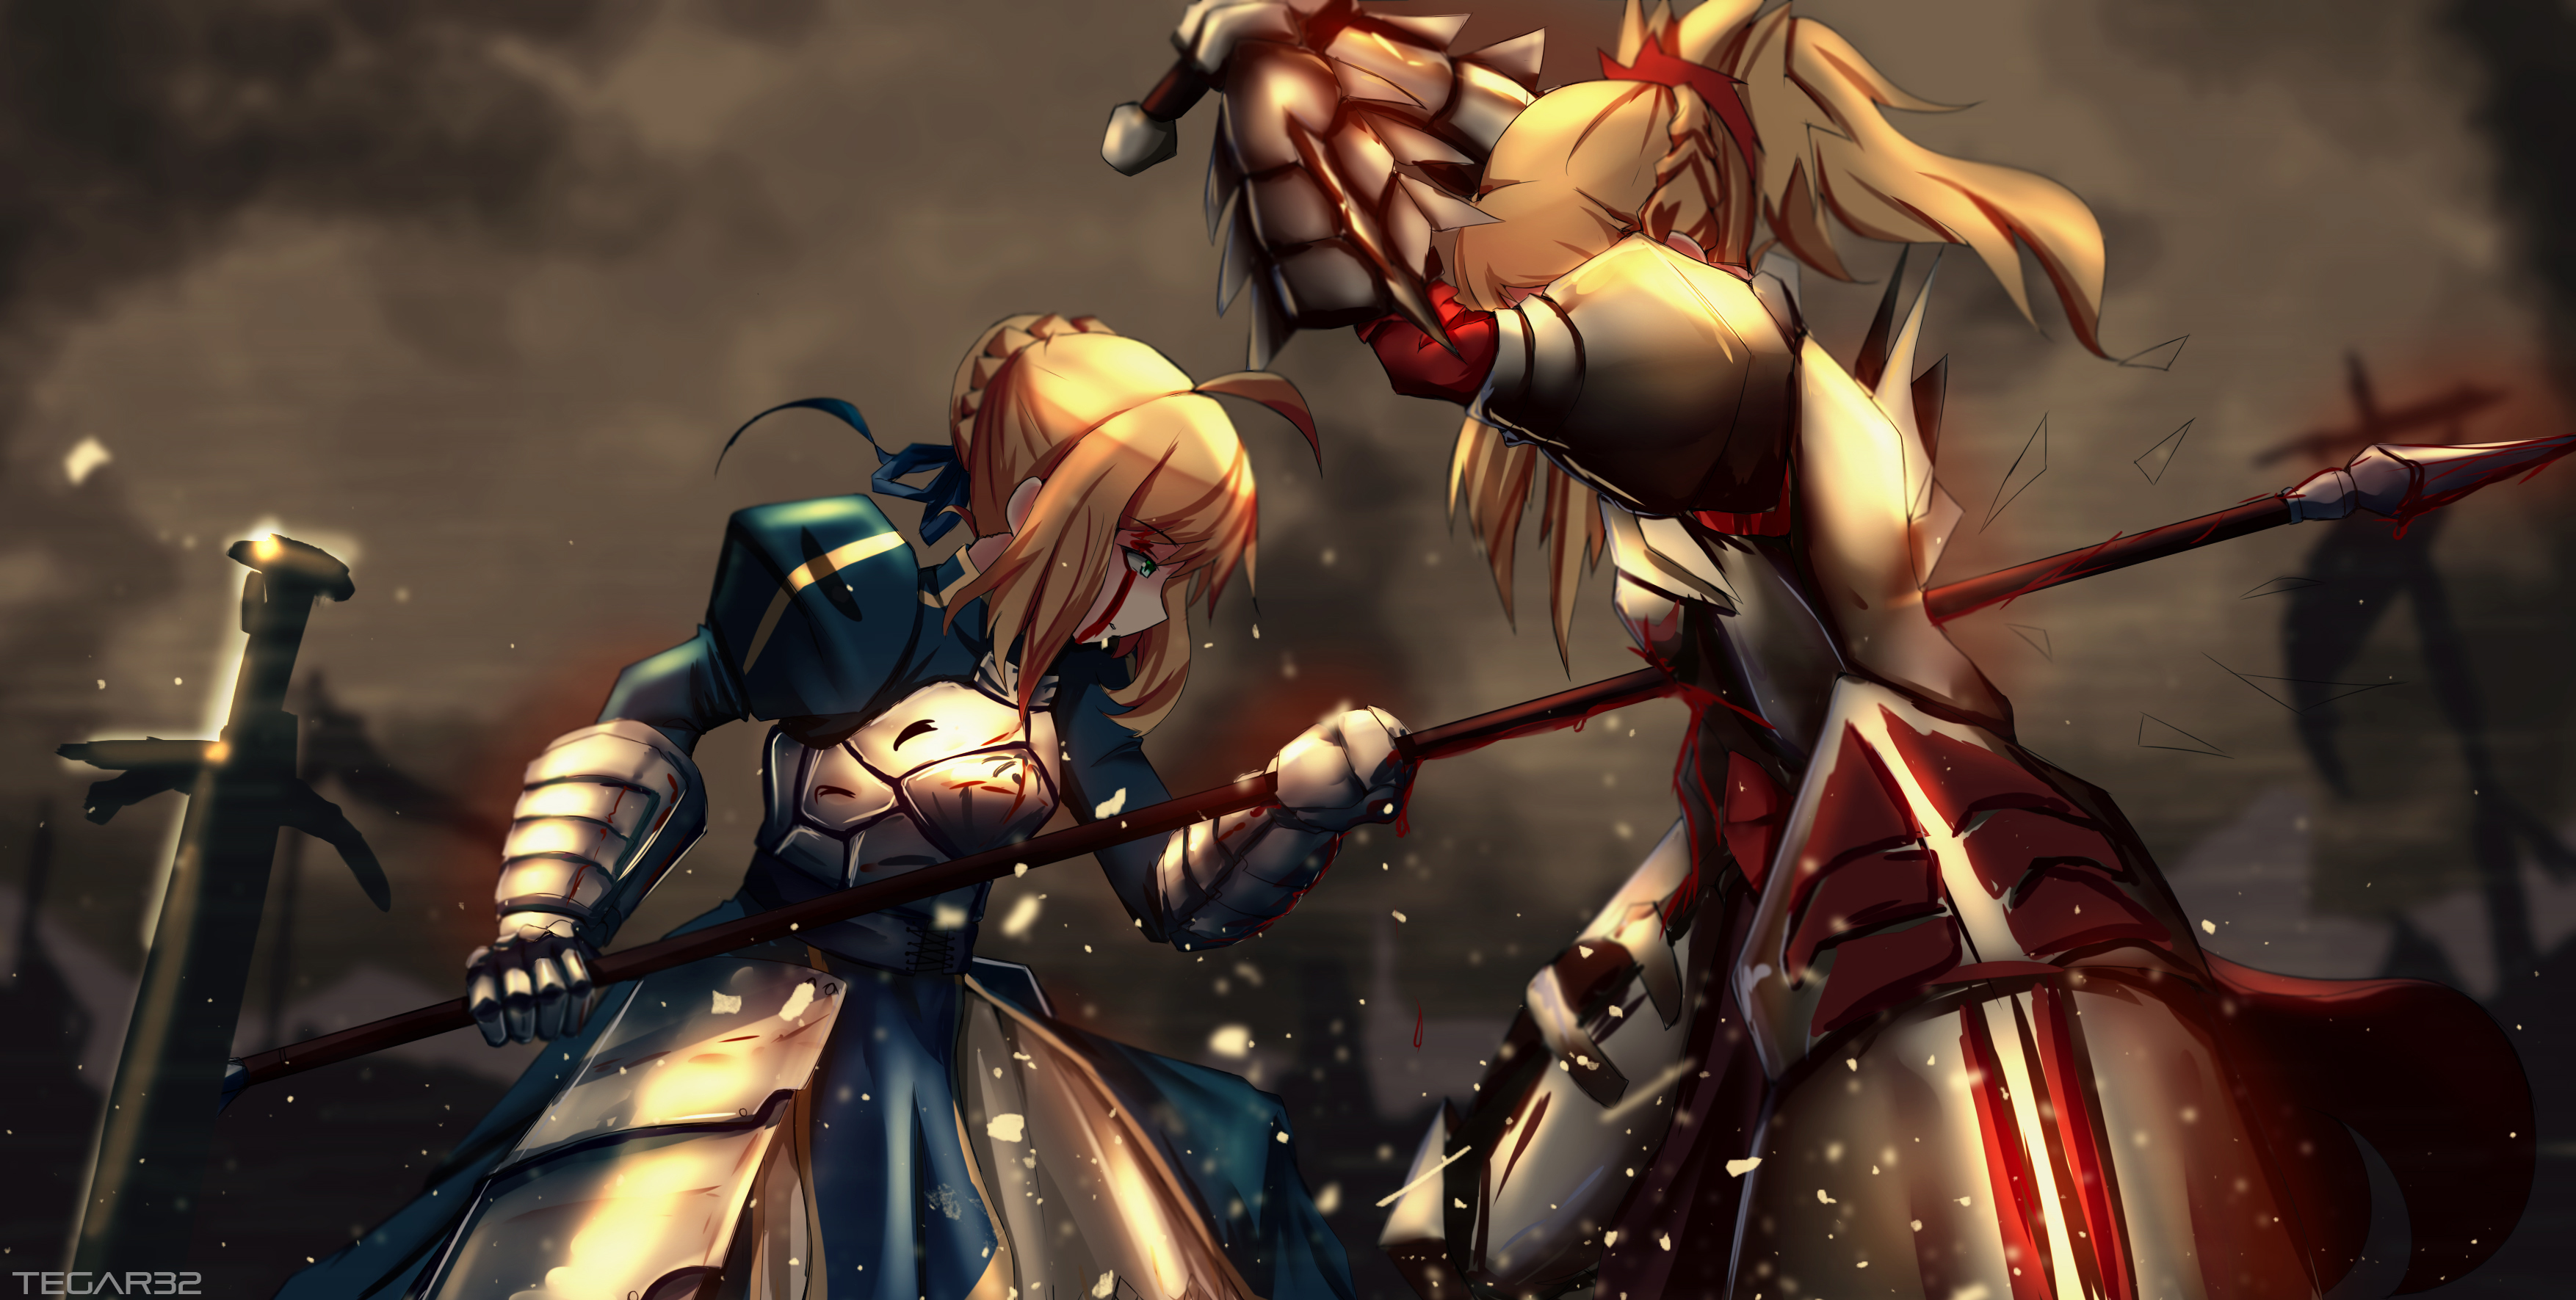 Anime 3508x1771 Fate series Fate/Apocrypha  anime girls Mordred (Fate/Apocrypha) Fate/Stay Night Saber Artoria Pendragon blonde armor battle blood